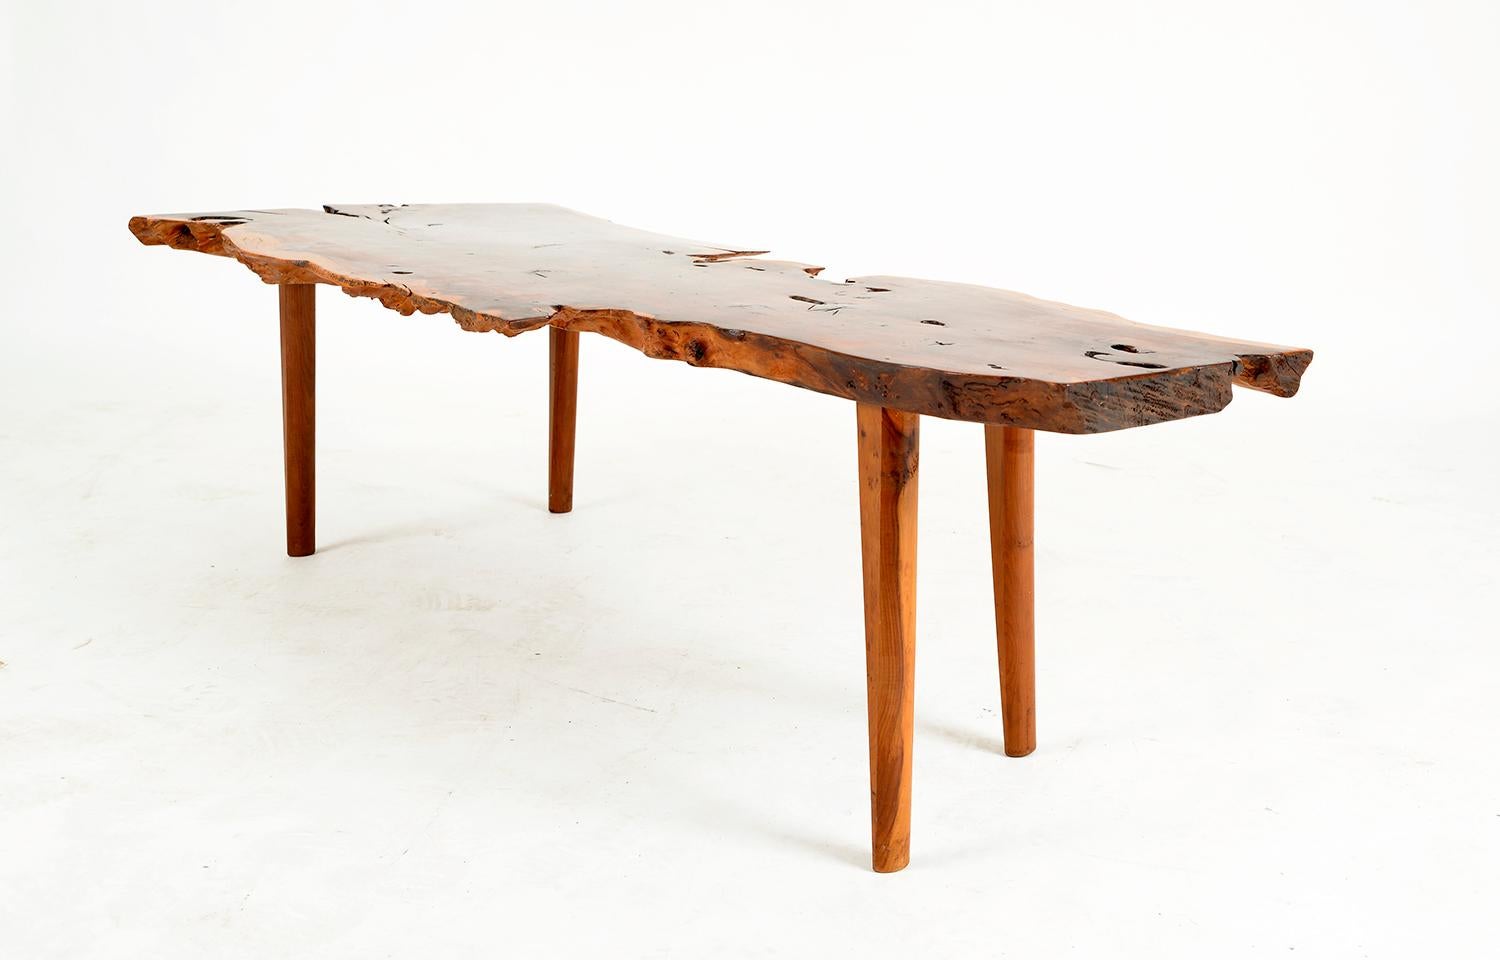 Mid-Century Modern Yew Wood Live Edge Plank Coffee Table by Reynolds of Ludlow English 1950s 1960s